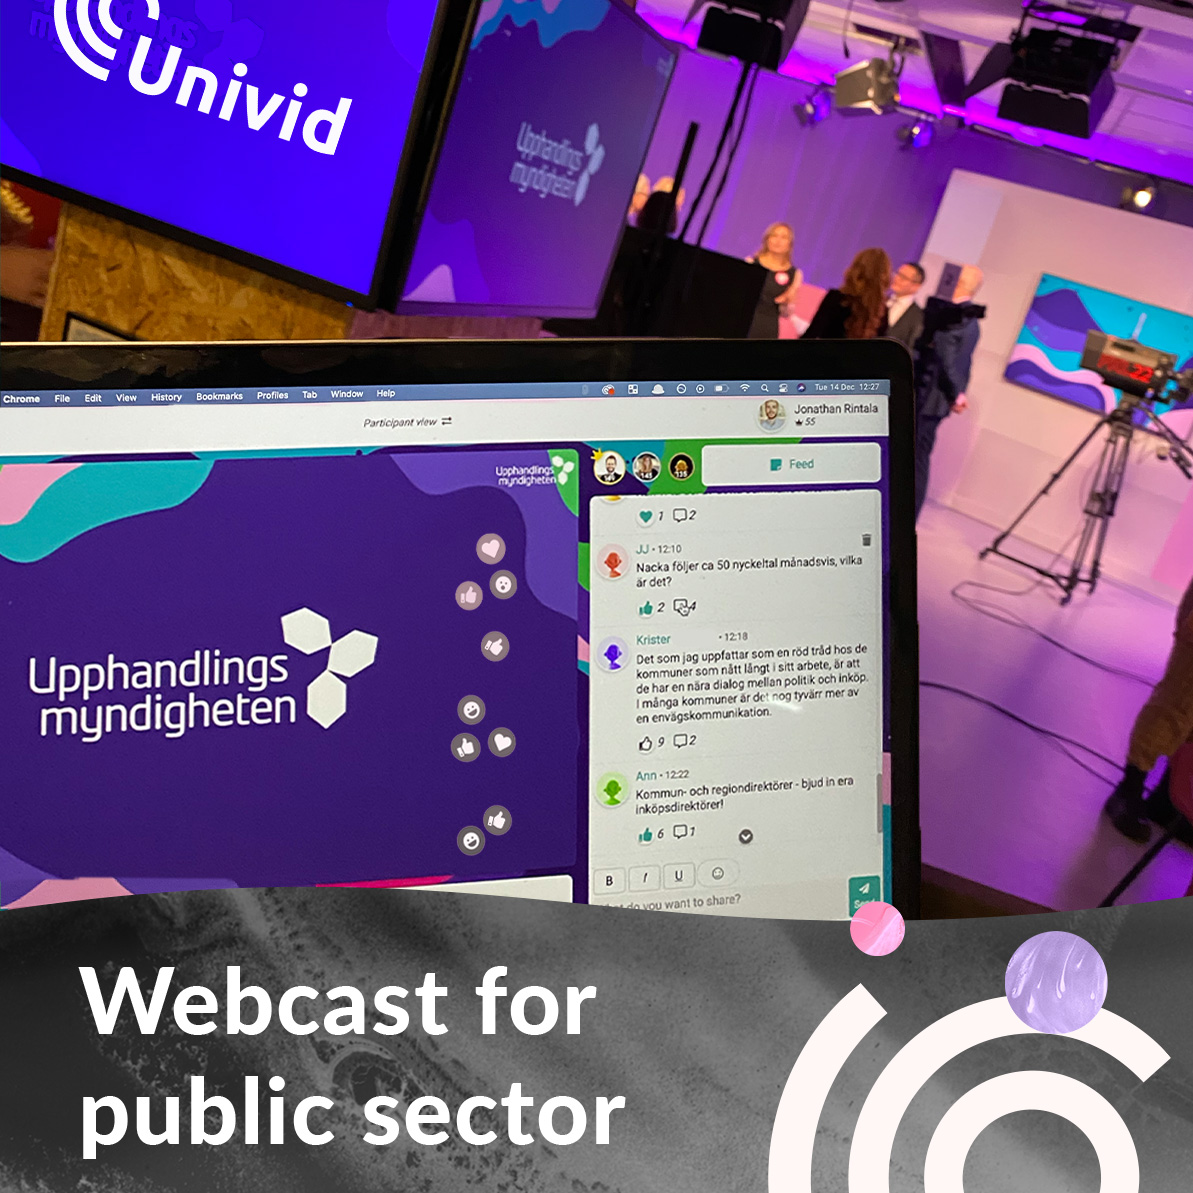 Who could have guessed that one of Sweden's most beautiful digital events is held by a national agency? At Univid we were really impressed by The National Agency for Public Procurement's stylish graphic profile that flowed through the entire webcast they chose to livestream on Univid. A webcast that was not only great content-wise, but also interactive with a lot of reactions, questions and discussions in the chat. A perfect forum for bringing together leading municipal politicians from all over the country in a live broadcast. Constructive debates, inspirational speeches, and many new ideas.